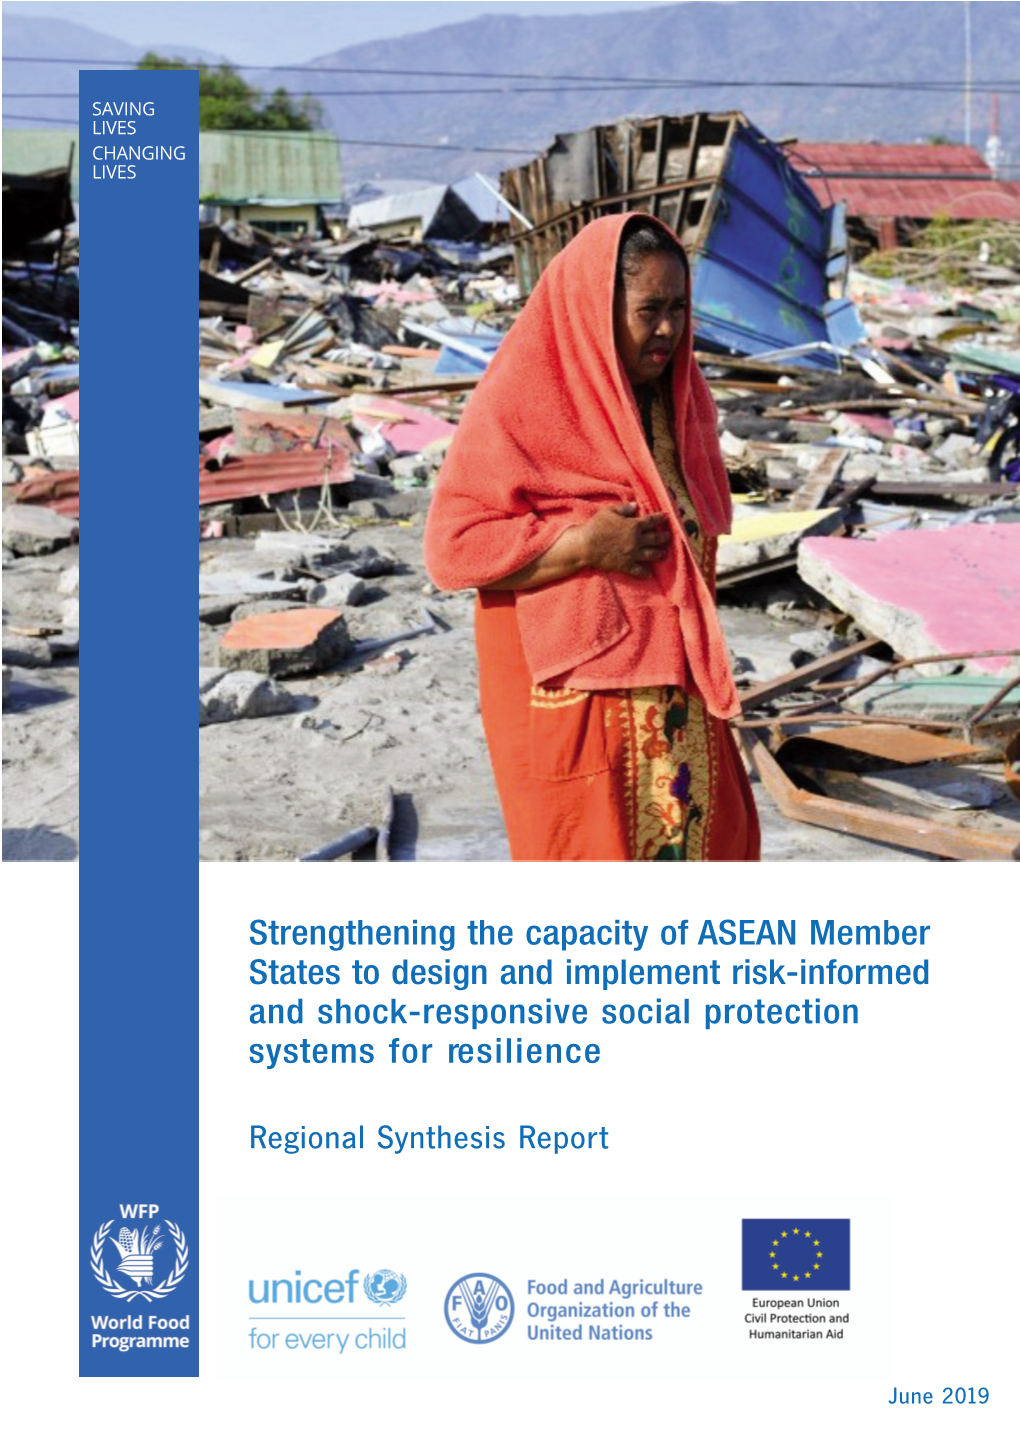 Responsive Social Protection Systems for Resilience